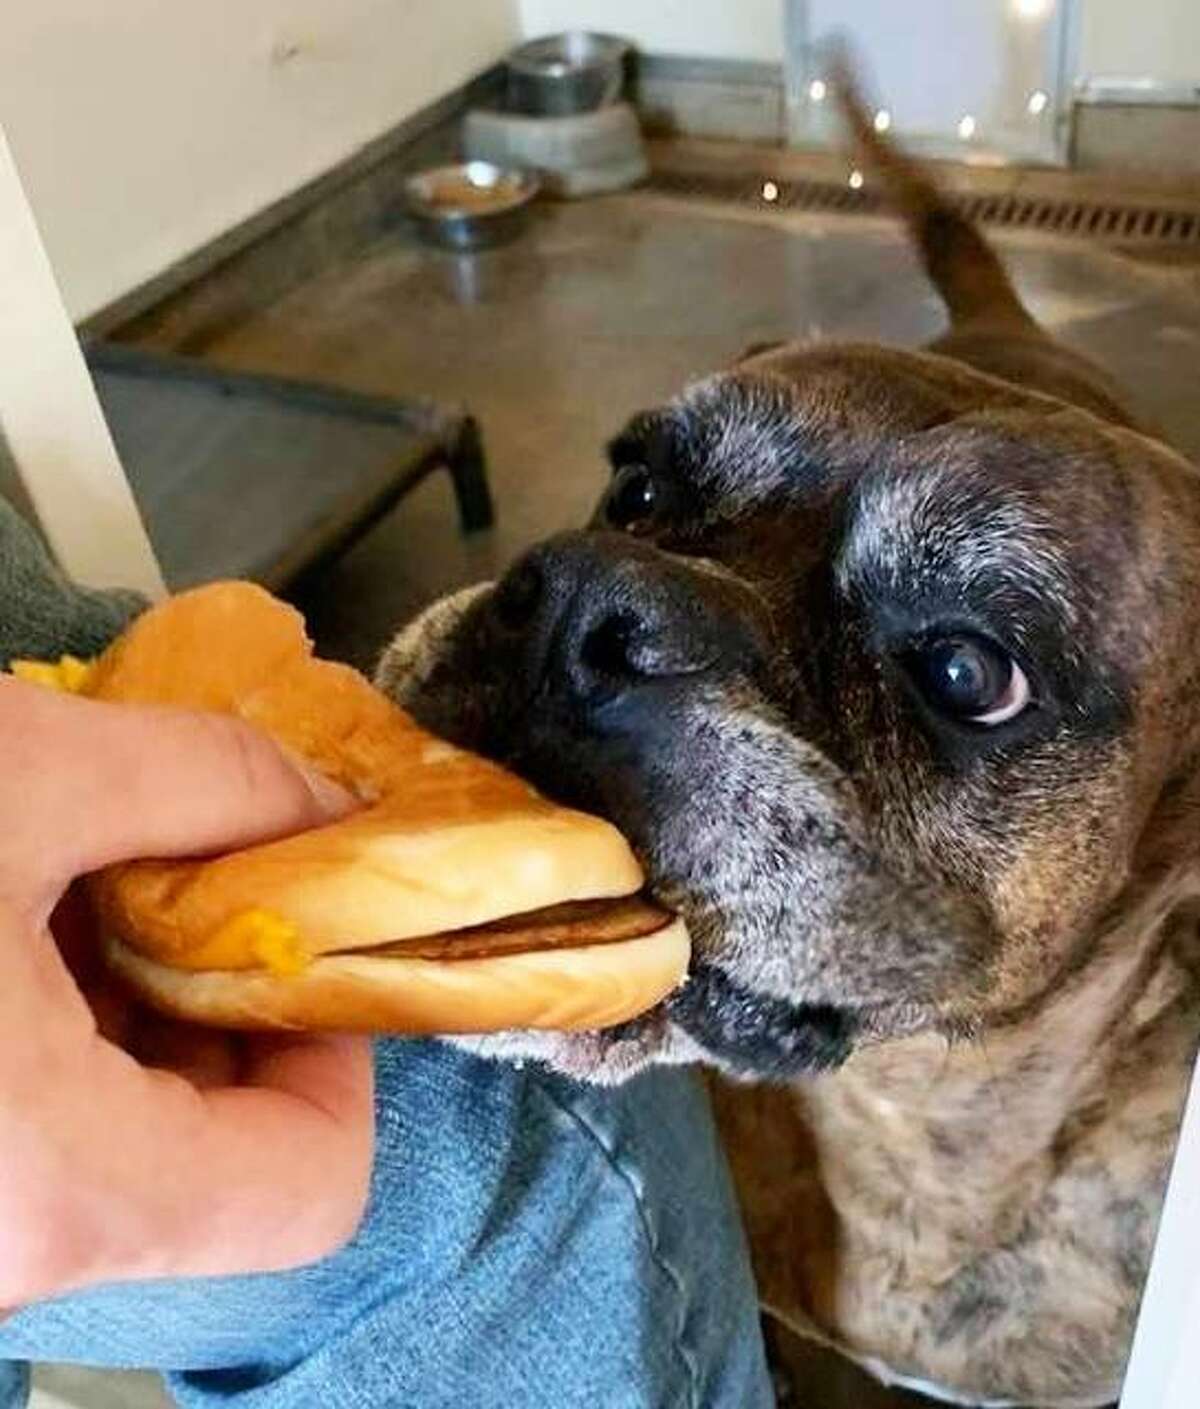 A dog at Hope Animal Rescues receives a sandwich during “Sue’s Cheeseburger Day”, when dogs at the shelter receive McDonald’s cheeseburgers.